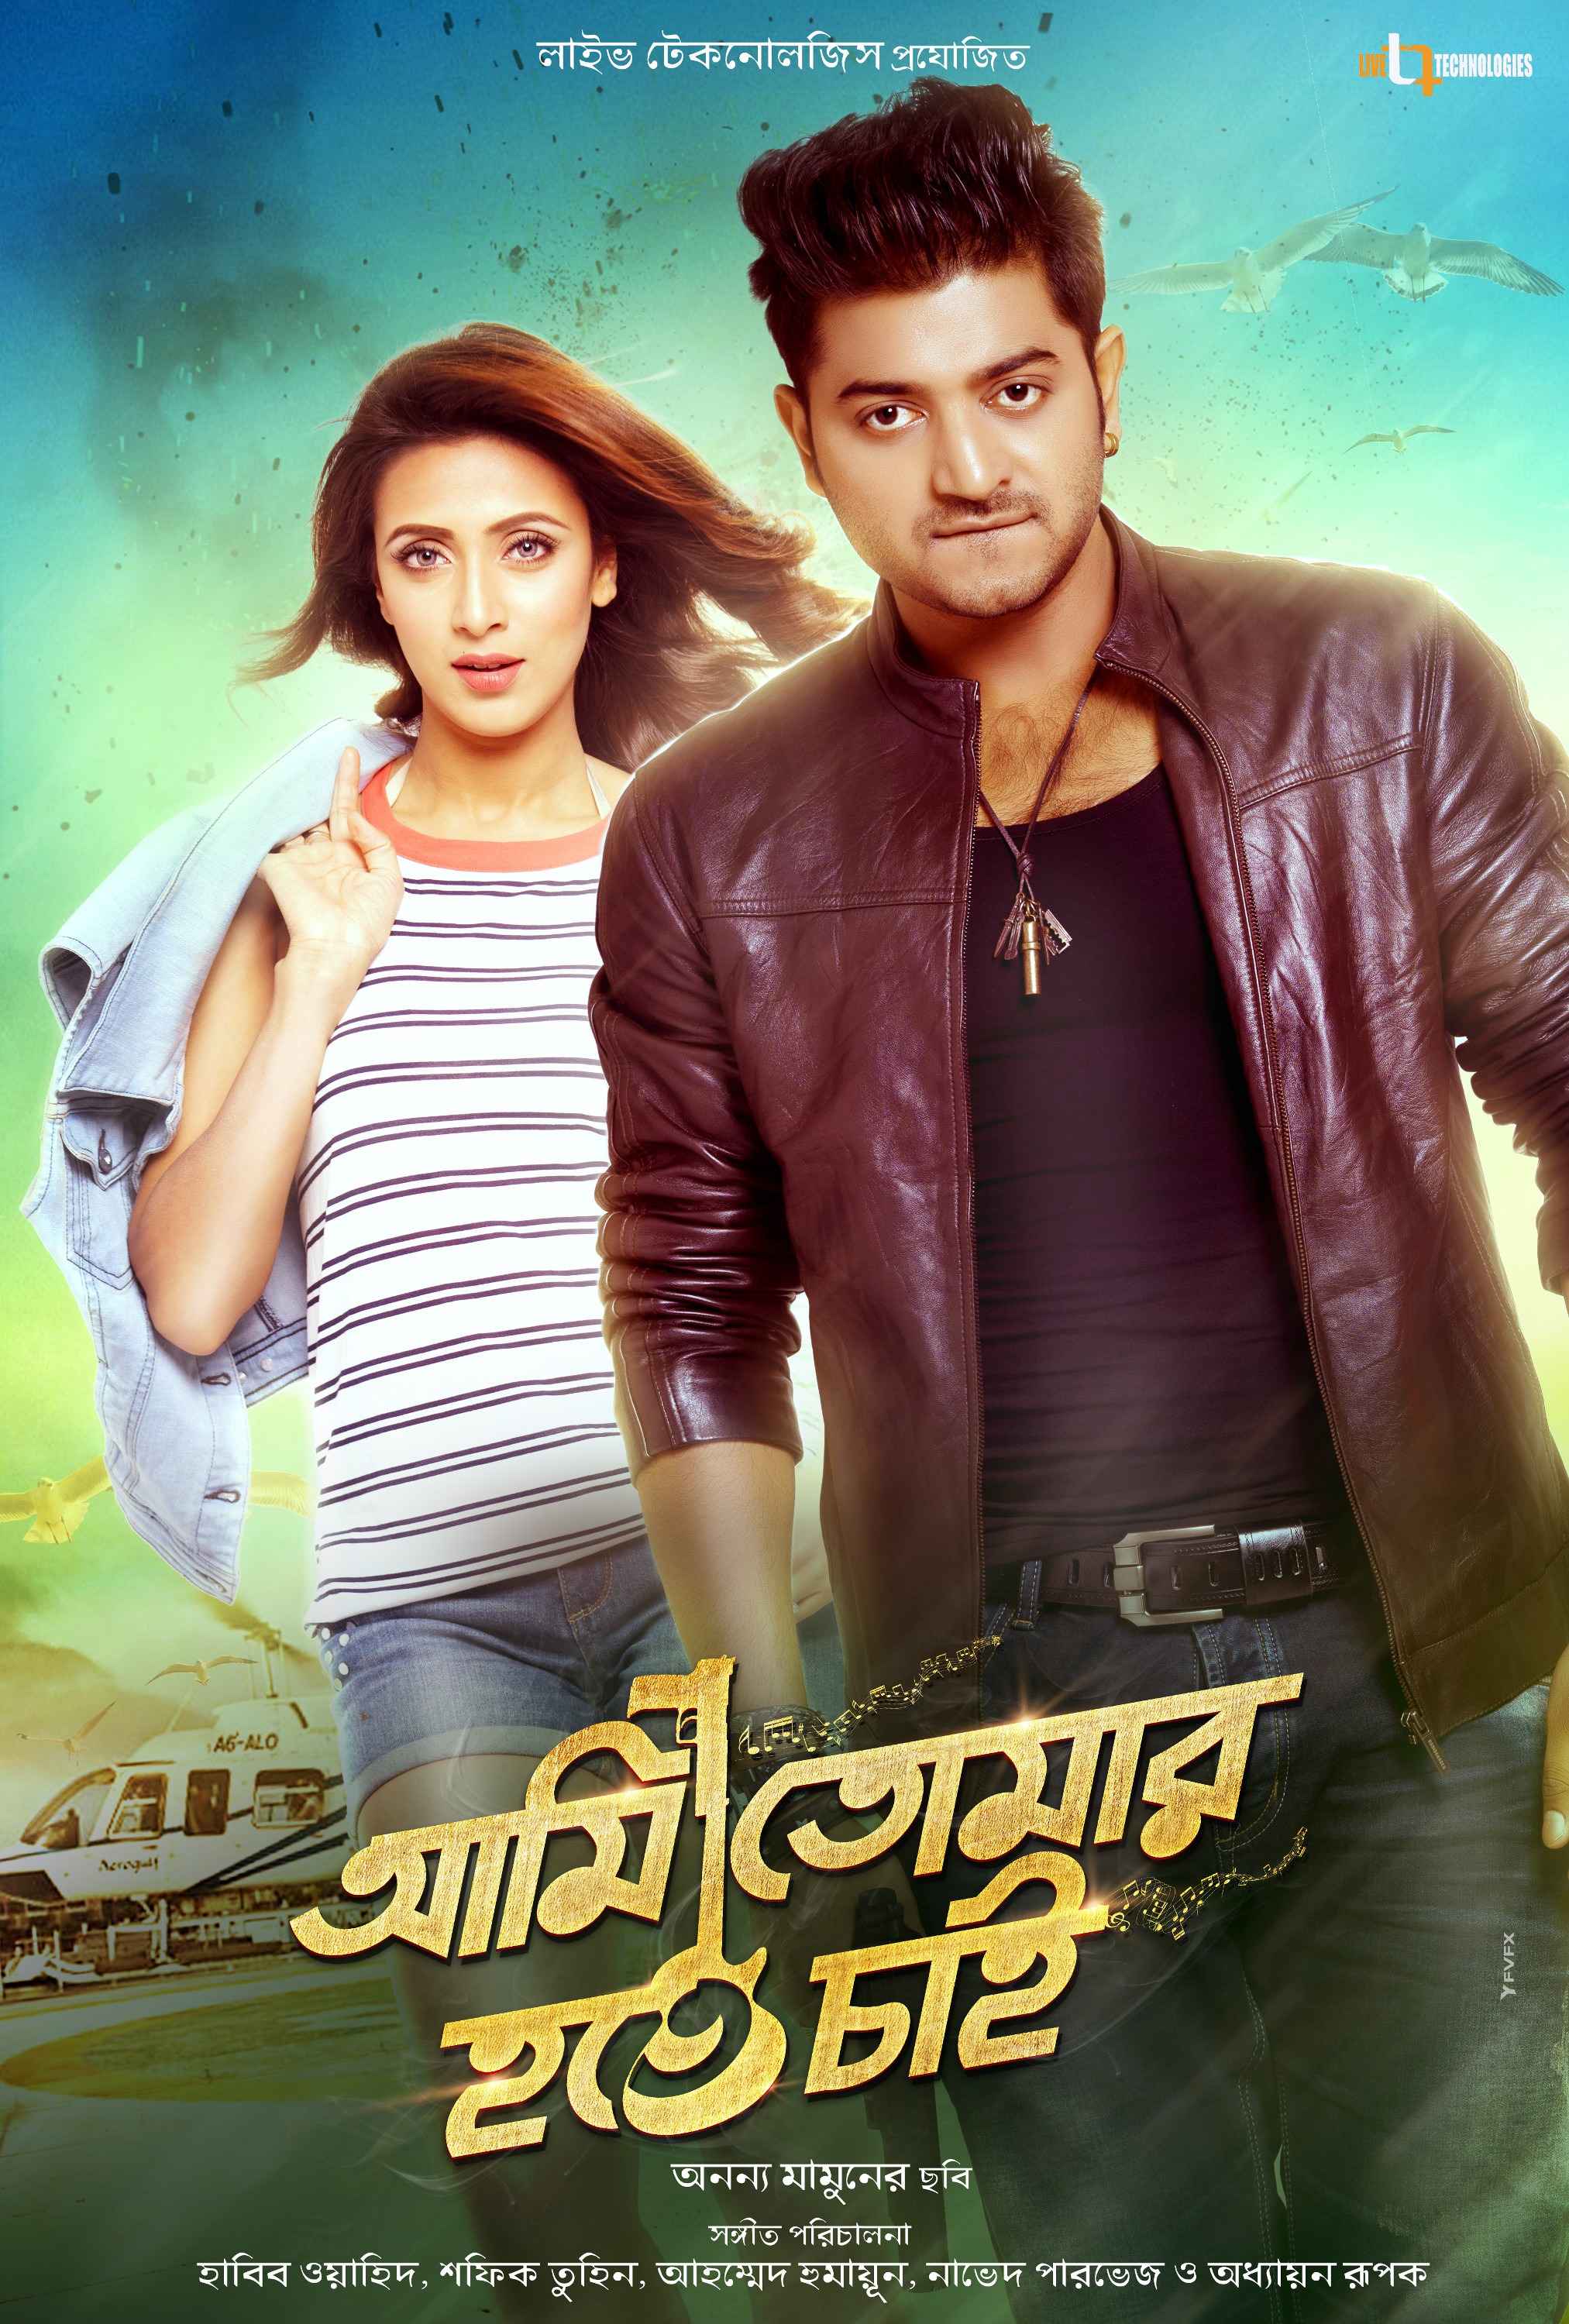 Mega Sized Movie Poster Image for Ami Tomar Hote Chai (#10 of 11)